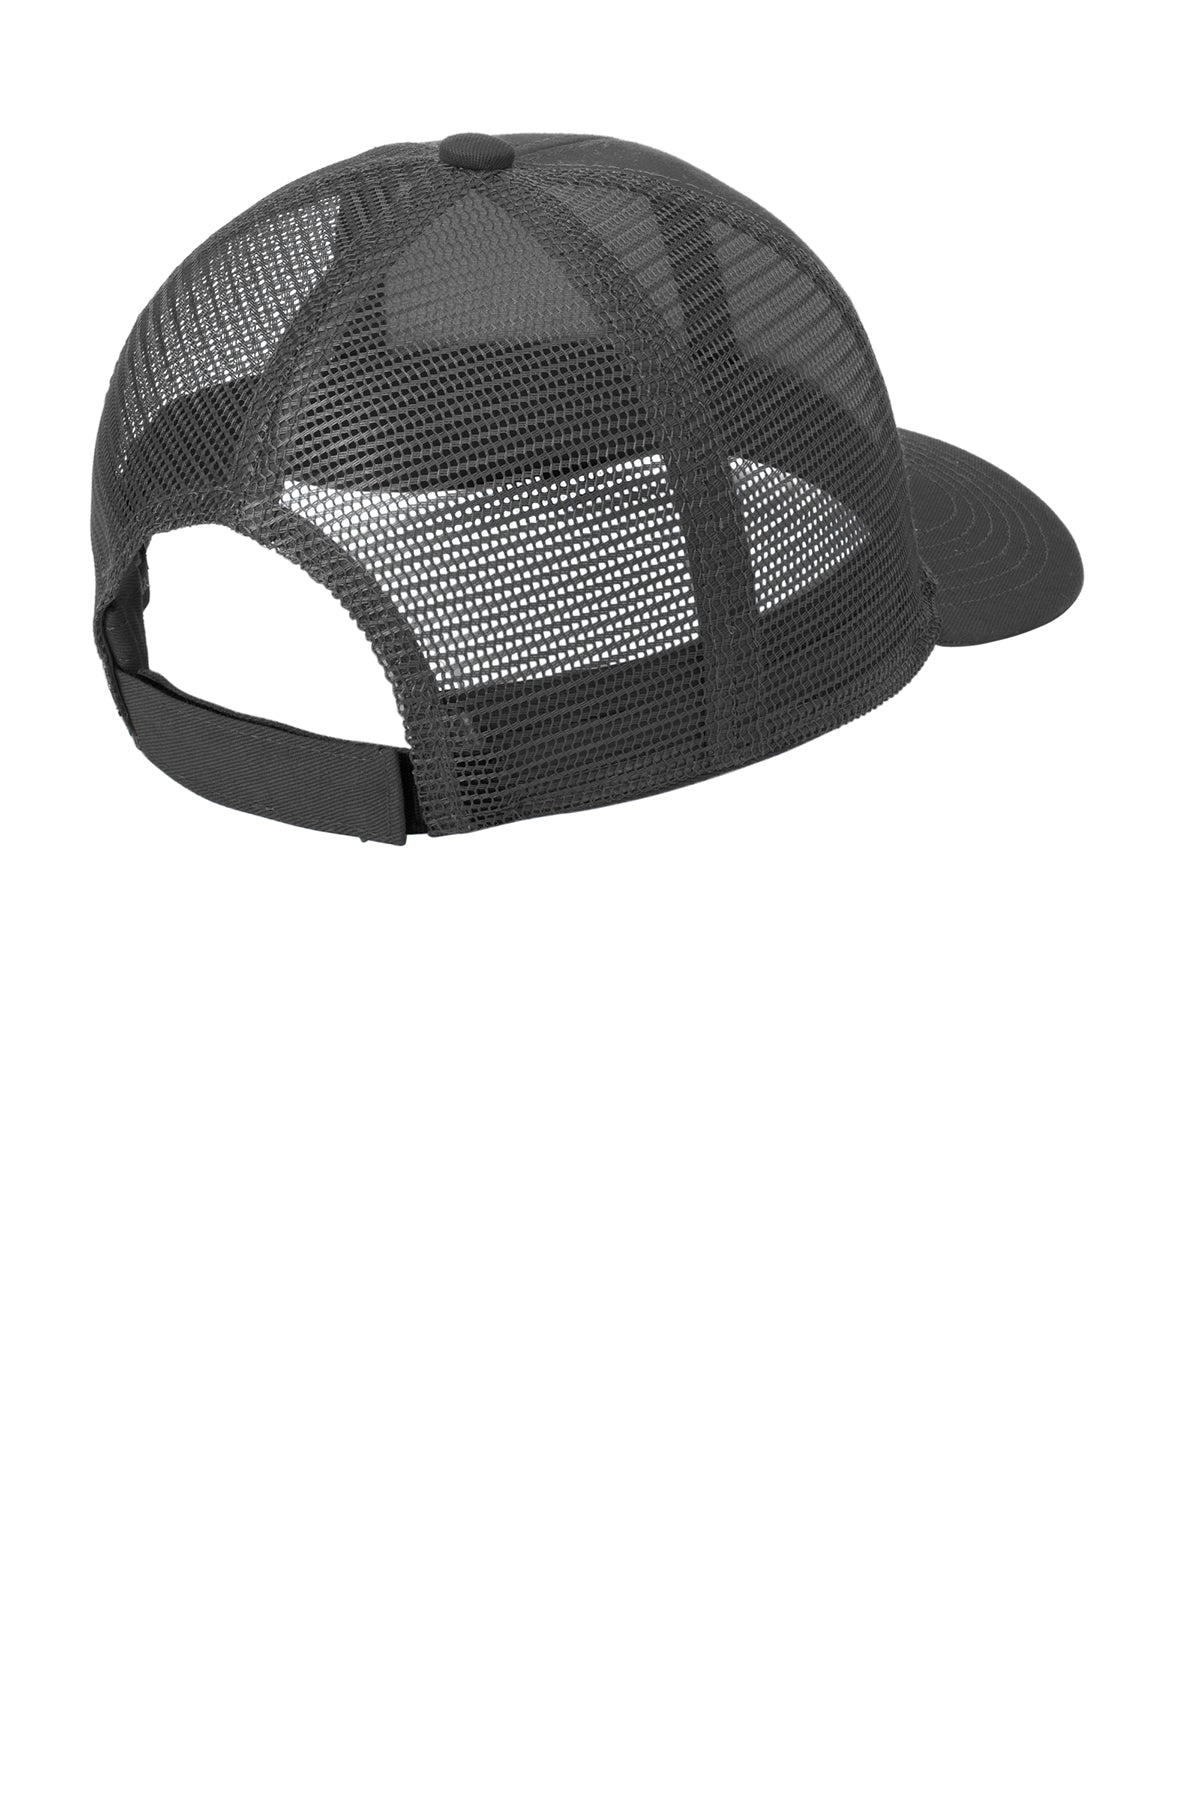 Port Authority Adjustable Mesh Back Branded Caps, Carbon Grey